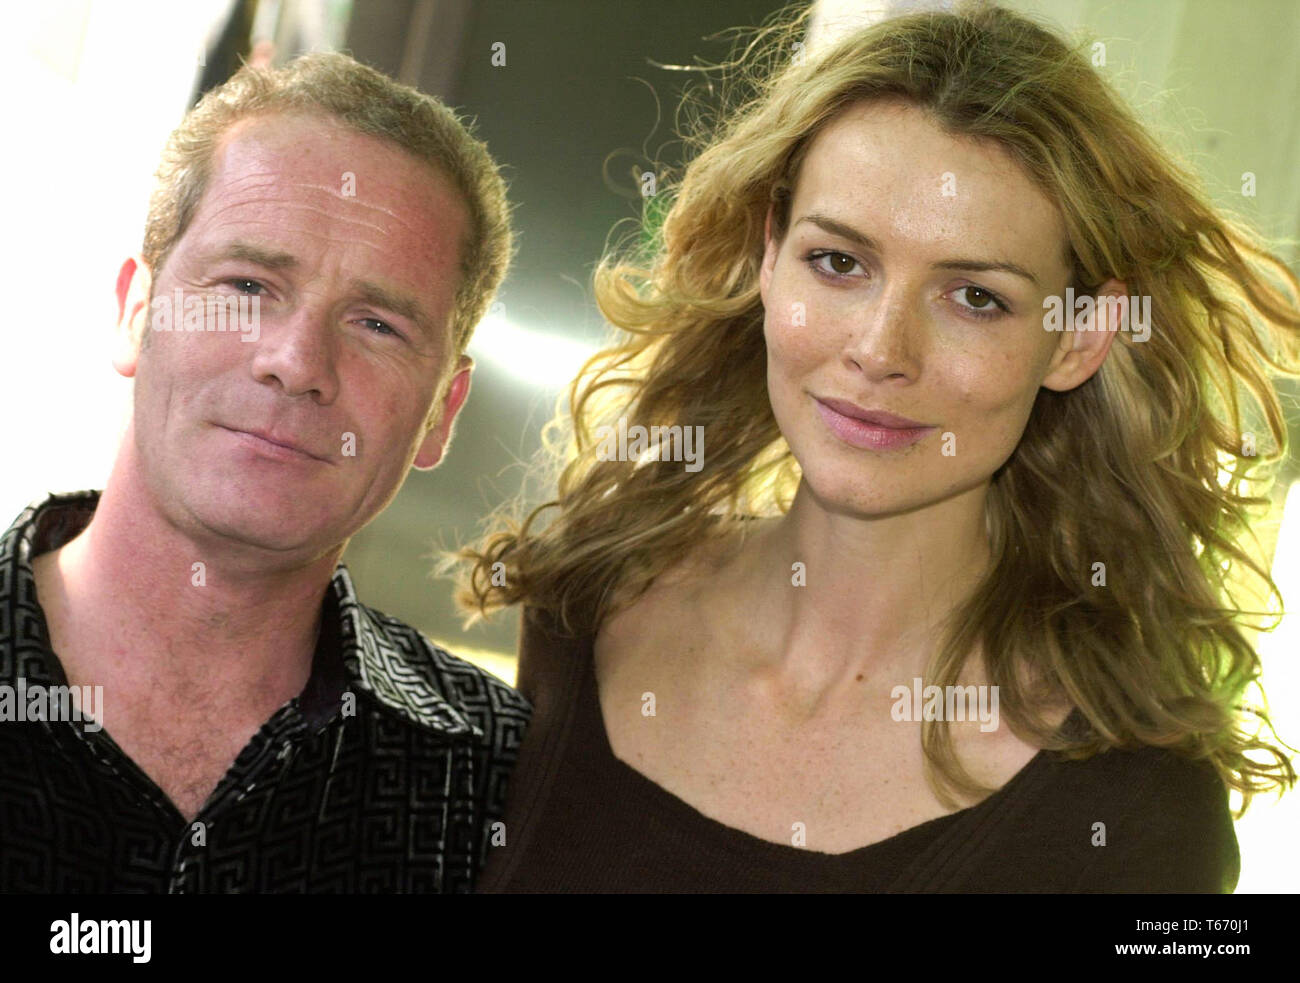 The launch of Antonine Short Film Factory's 8 1/2 Scottish Film Scheme at Favorit in Edinburgh today Wednesday 17/8/00. Stars of the film Miss Julie, Peter Mullan and Saffron Burrows are  pictured. Stock Photo